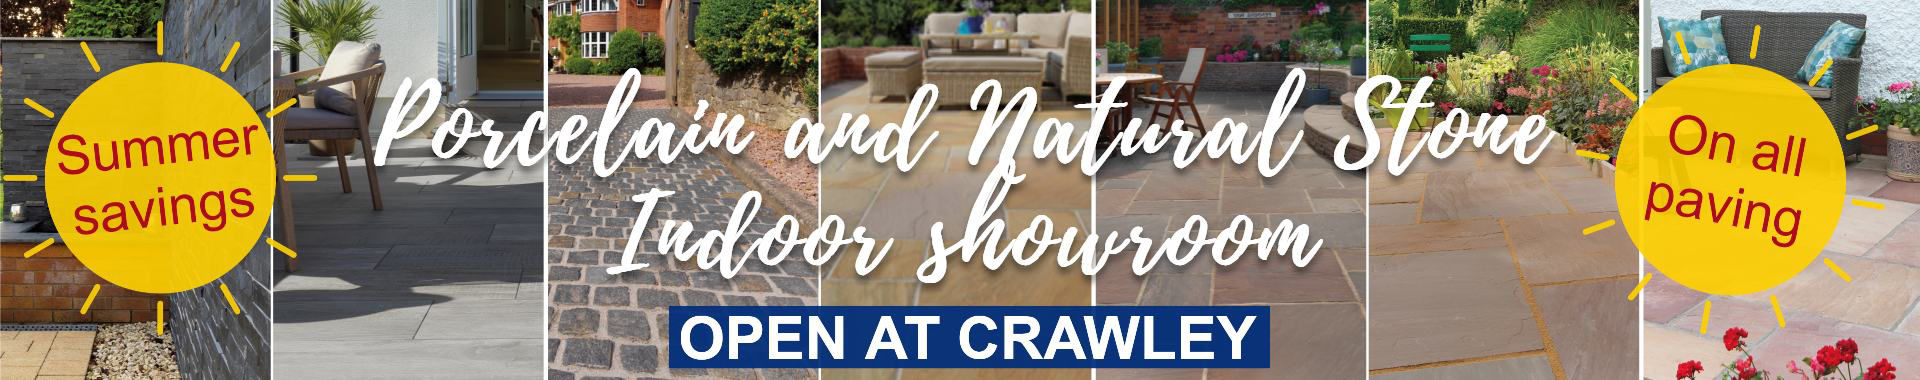 Natural Stone and Porcelain Paving Sale